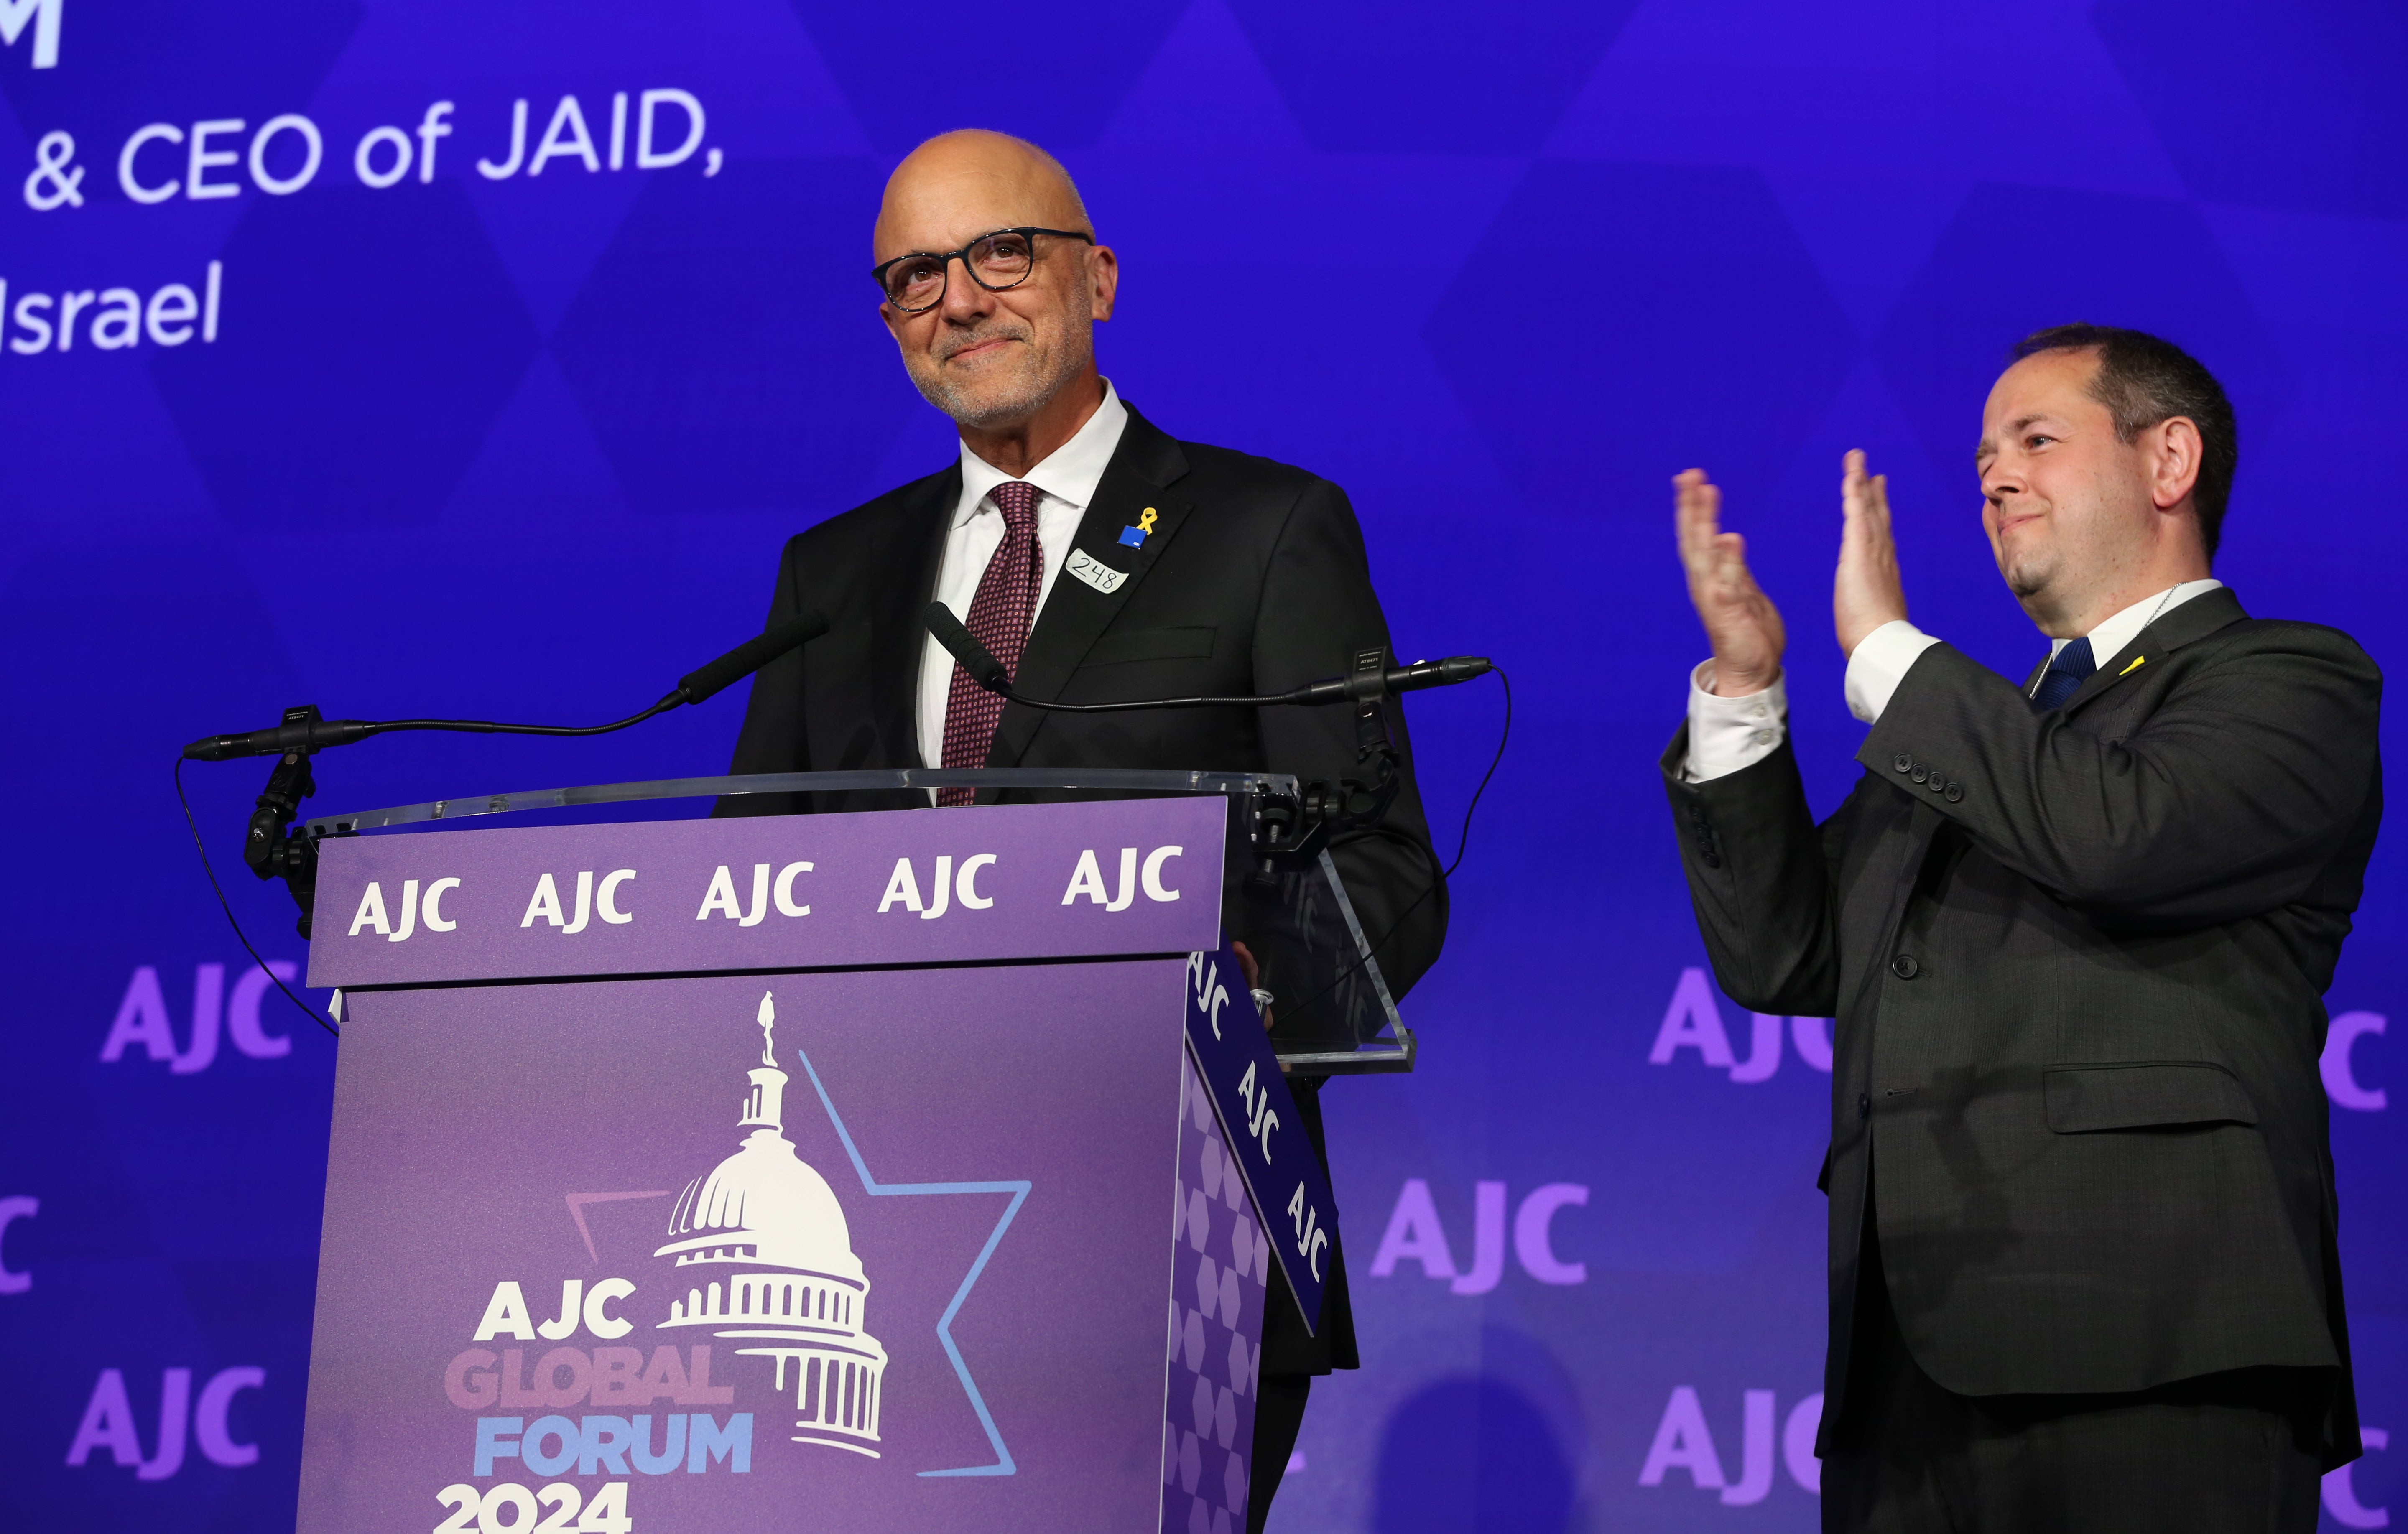 AJC CEO Ted Deutch and Dan Elbaum, Head of North America and President and CEO of Jewish Agency International Development